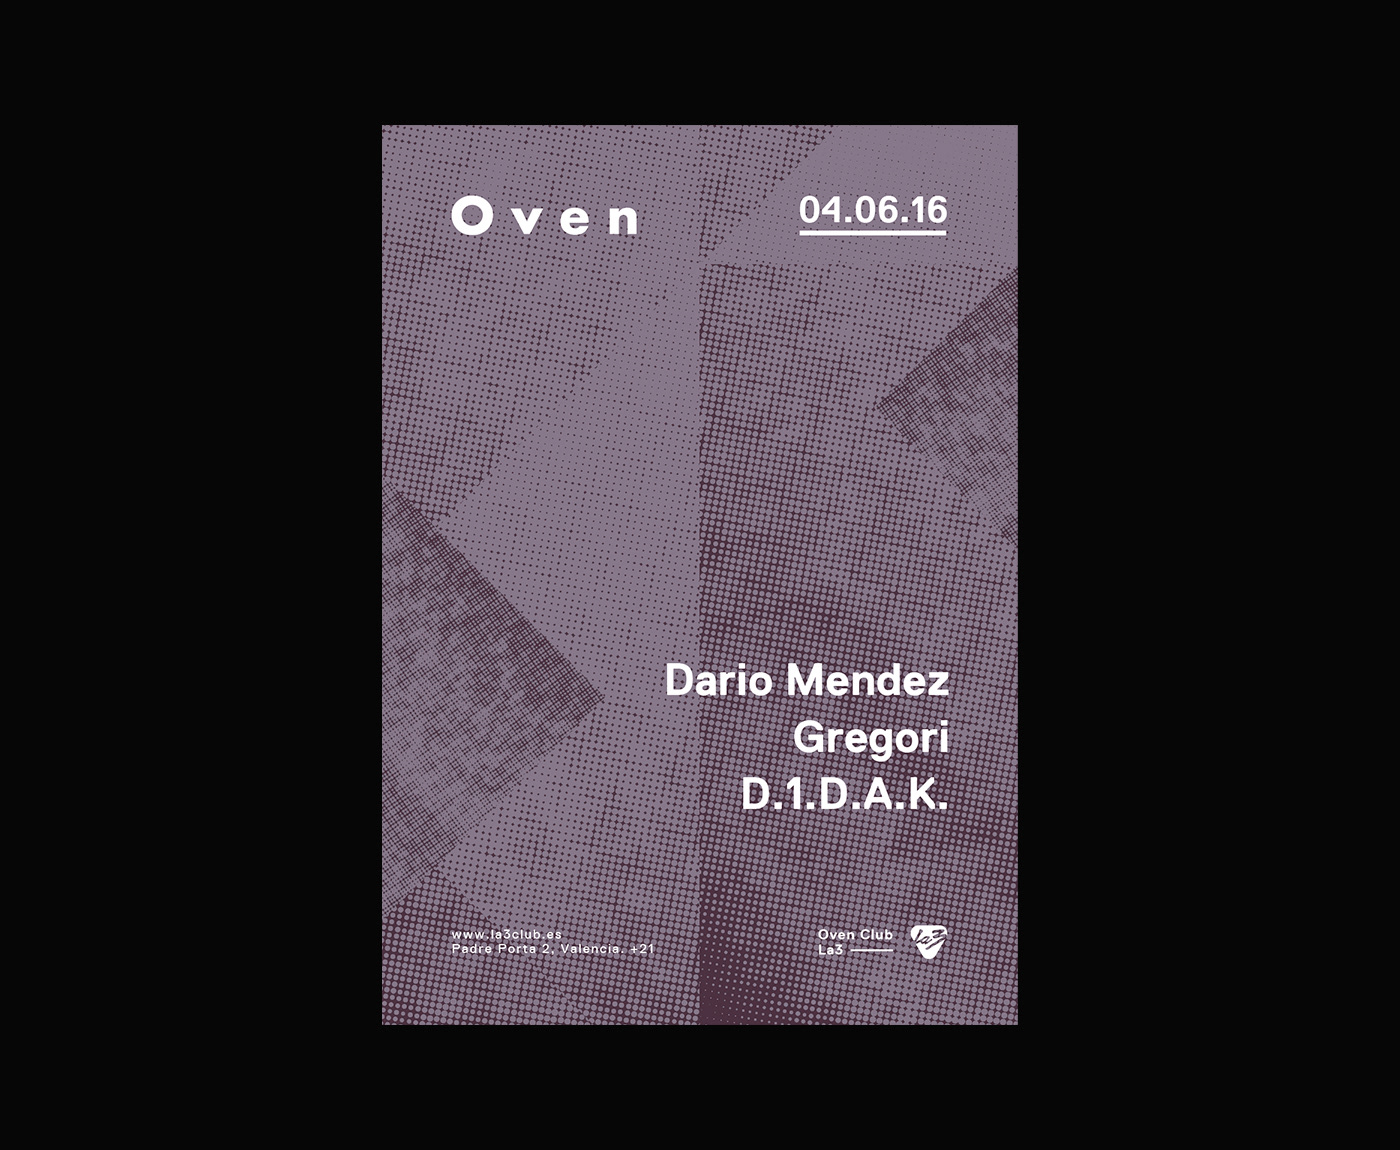 poster artwork flyer music electronic music graphic design  valencia oven club clubbing